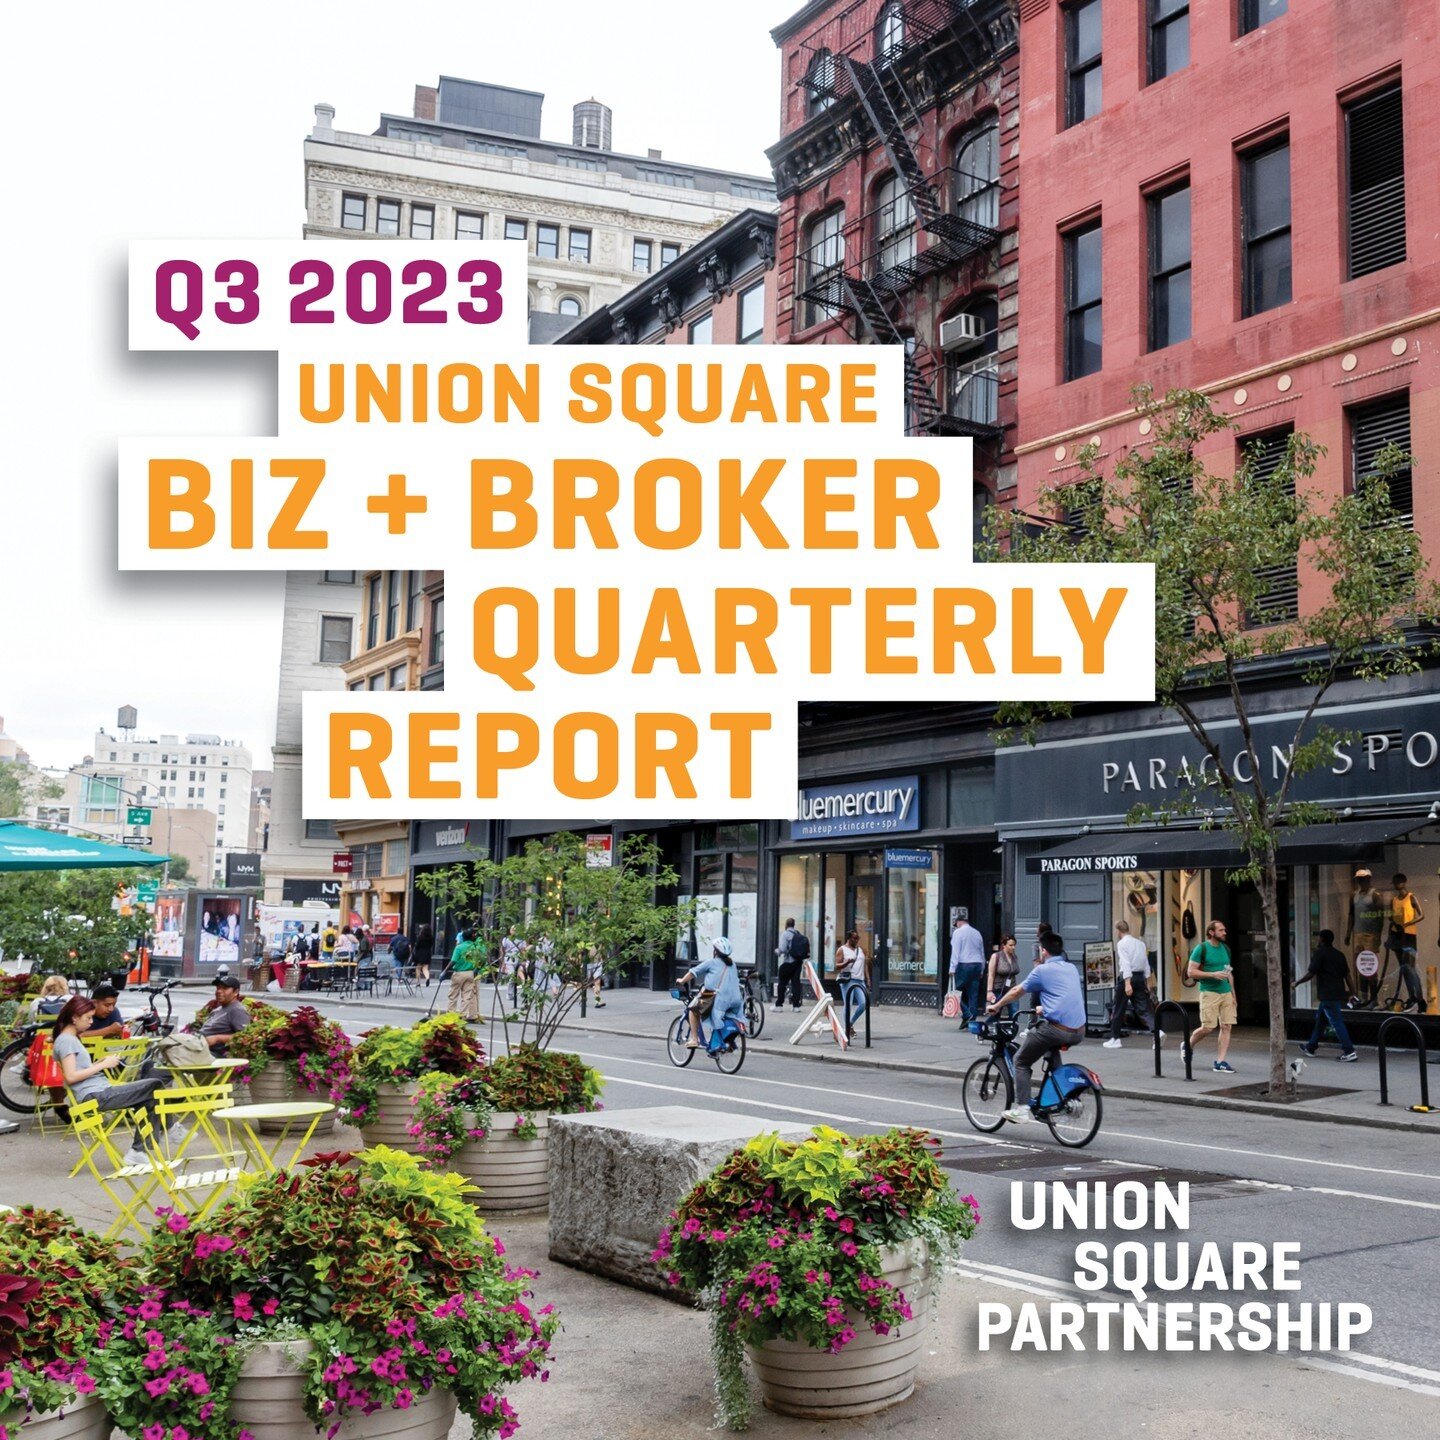 NEW RELEASE❗ 📰 Union Square Partnership has published the 2023 Q3 Biz + Broker! This quarterly report features the district&rsquo;s latest real estate news, hot foot traffic trends, and a map showcasing exciting ground-floor retail opportunities in 